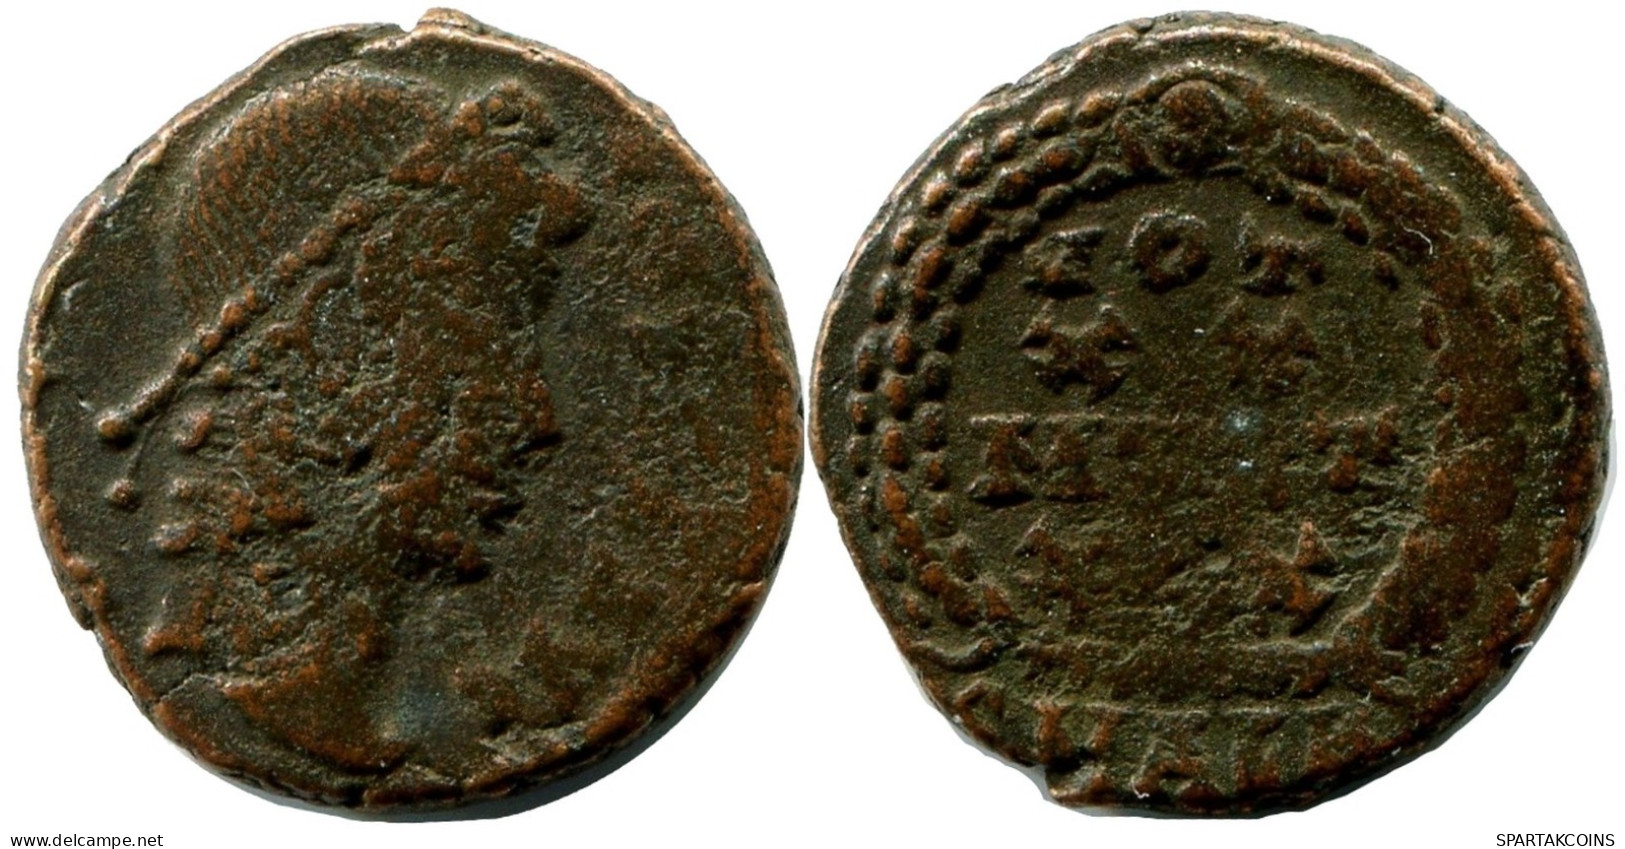 CONSTANS MINTED IN ALEKSANDRIA FROM THE ROYAL ONTARIO MUSEUM #ANC11486.14.U.A - El Impero Christiano (307 / 363)